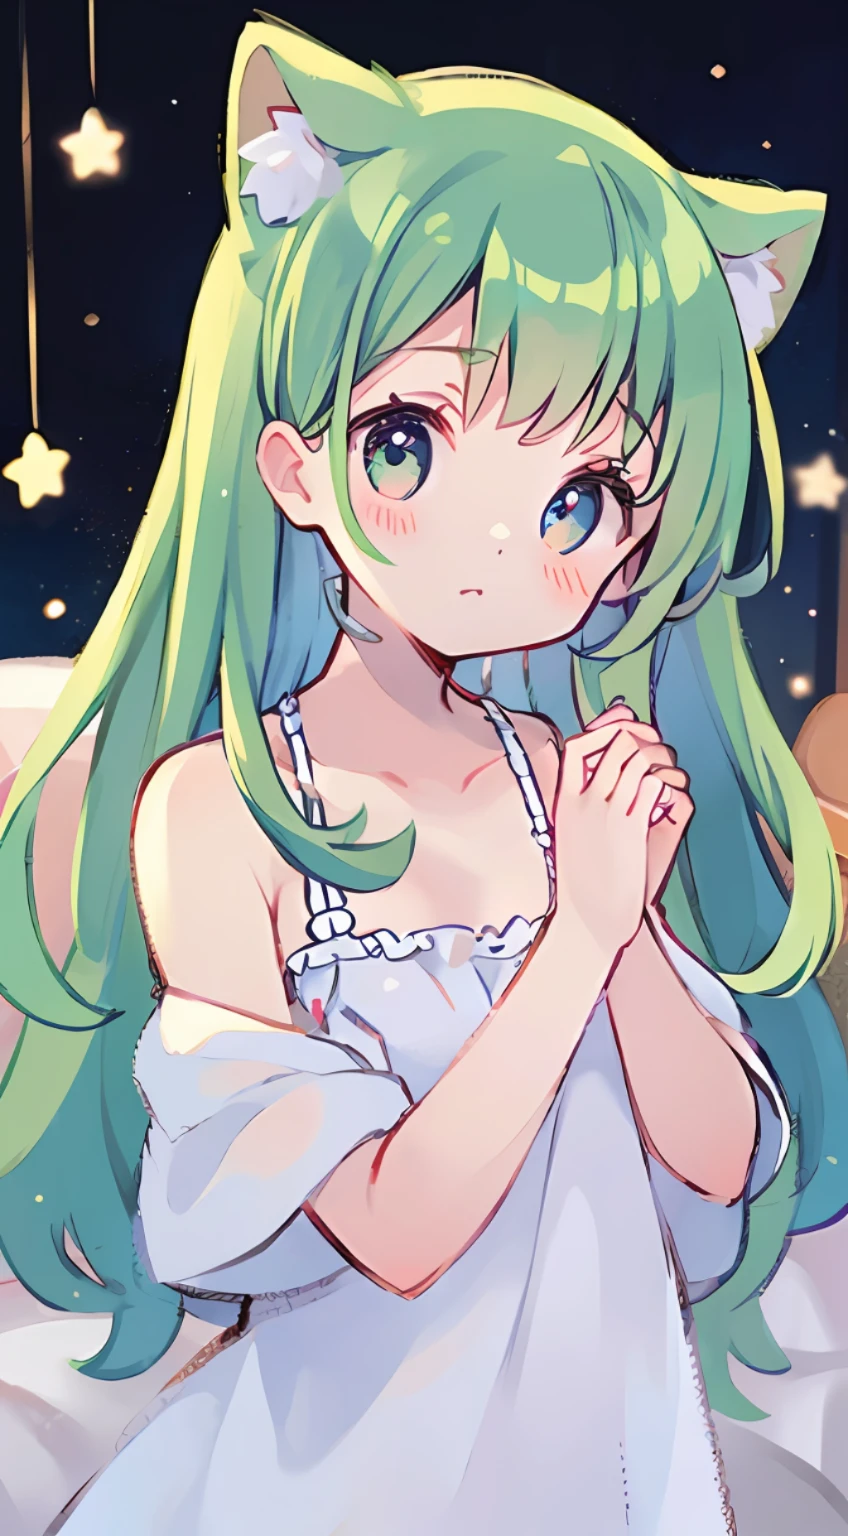 Top quality, masterpiece, super high resolution, pretty facial features, flat design, yellow theme,
One girl, light beige hair, indigo eyes, (sleepy eyes: 1.1), (cute yellow night dress), cute, one hand on face, bedtime, disheveled long hair, green hair, cat ears
(simple dark background), giant stars shining in the dark, bedroom, cure, ziyu,